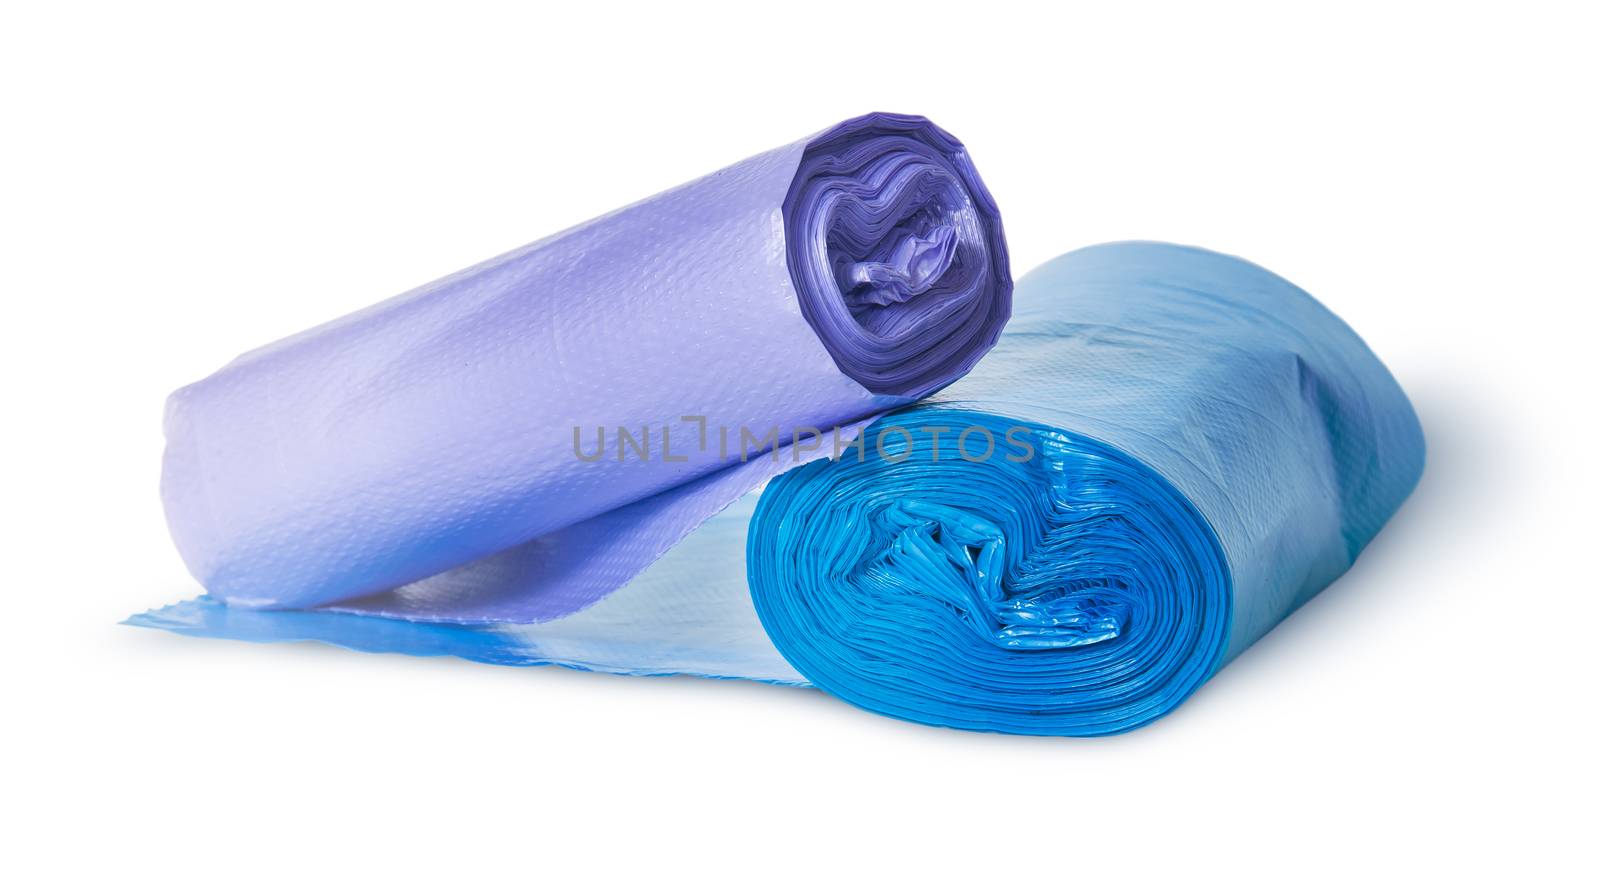 Two rolls of plastic garbage bags by Cipariss